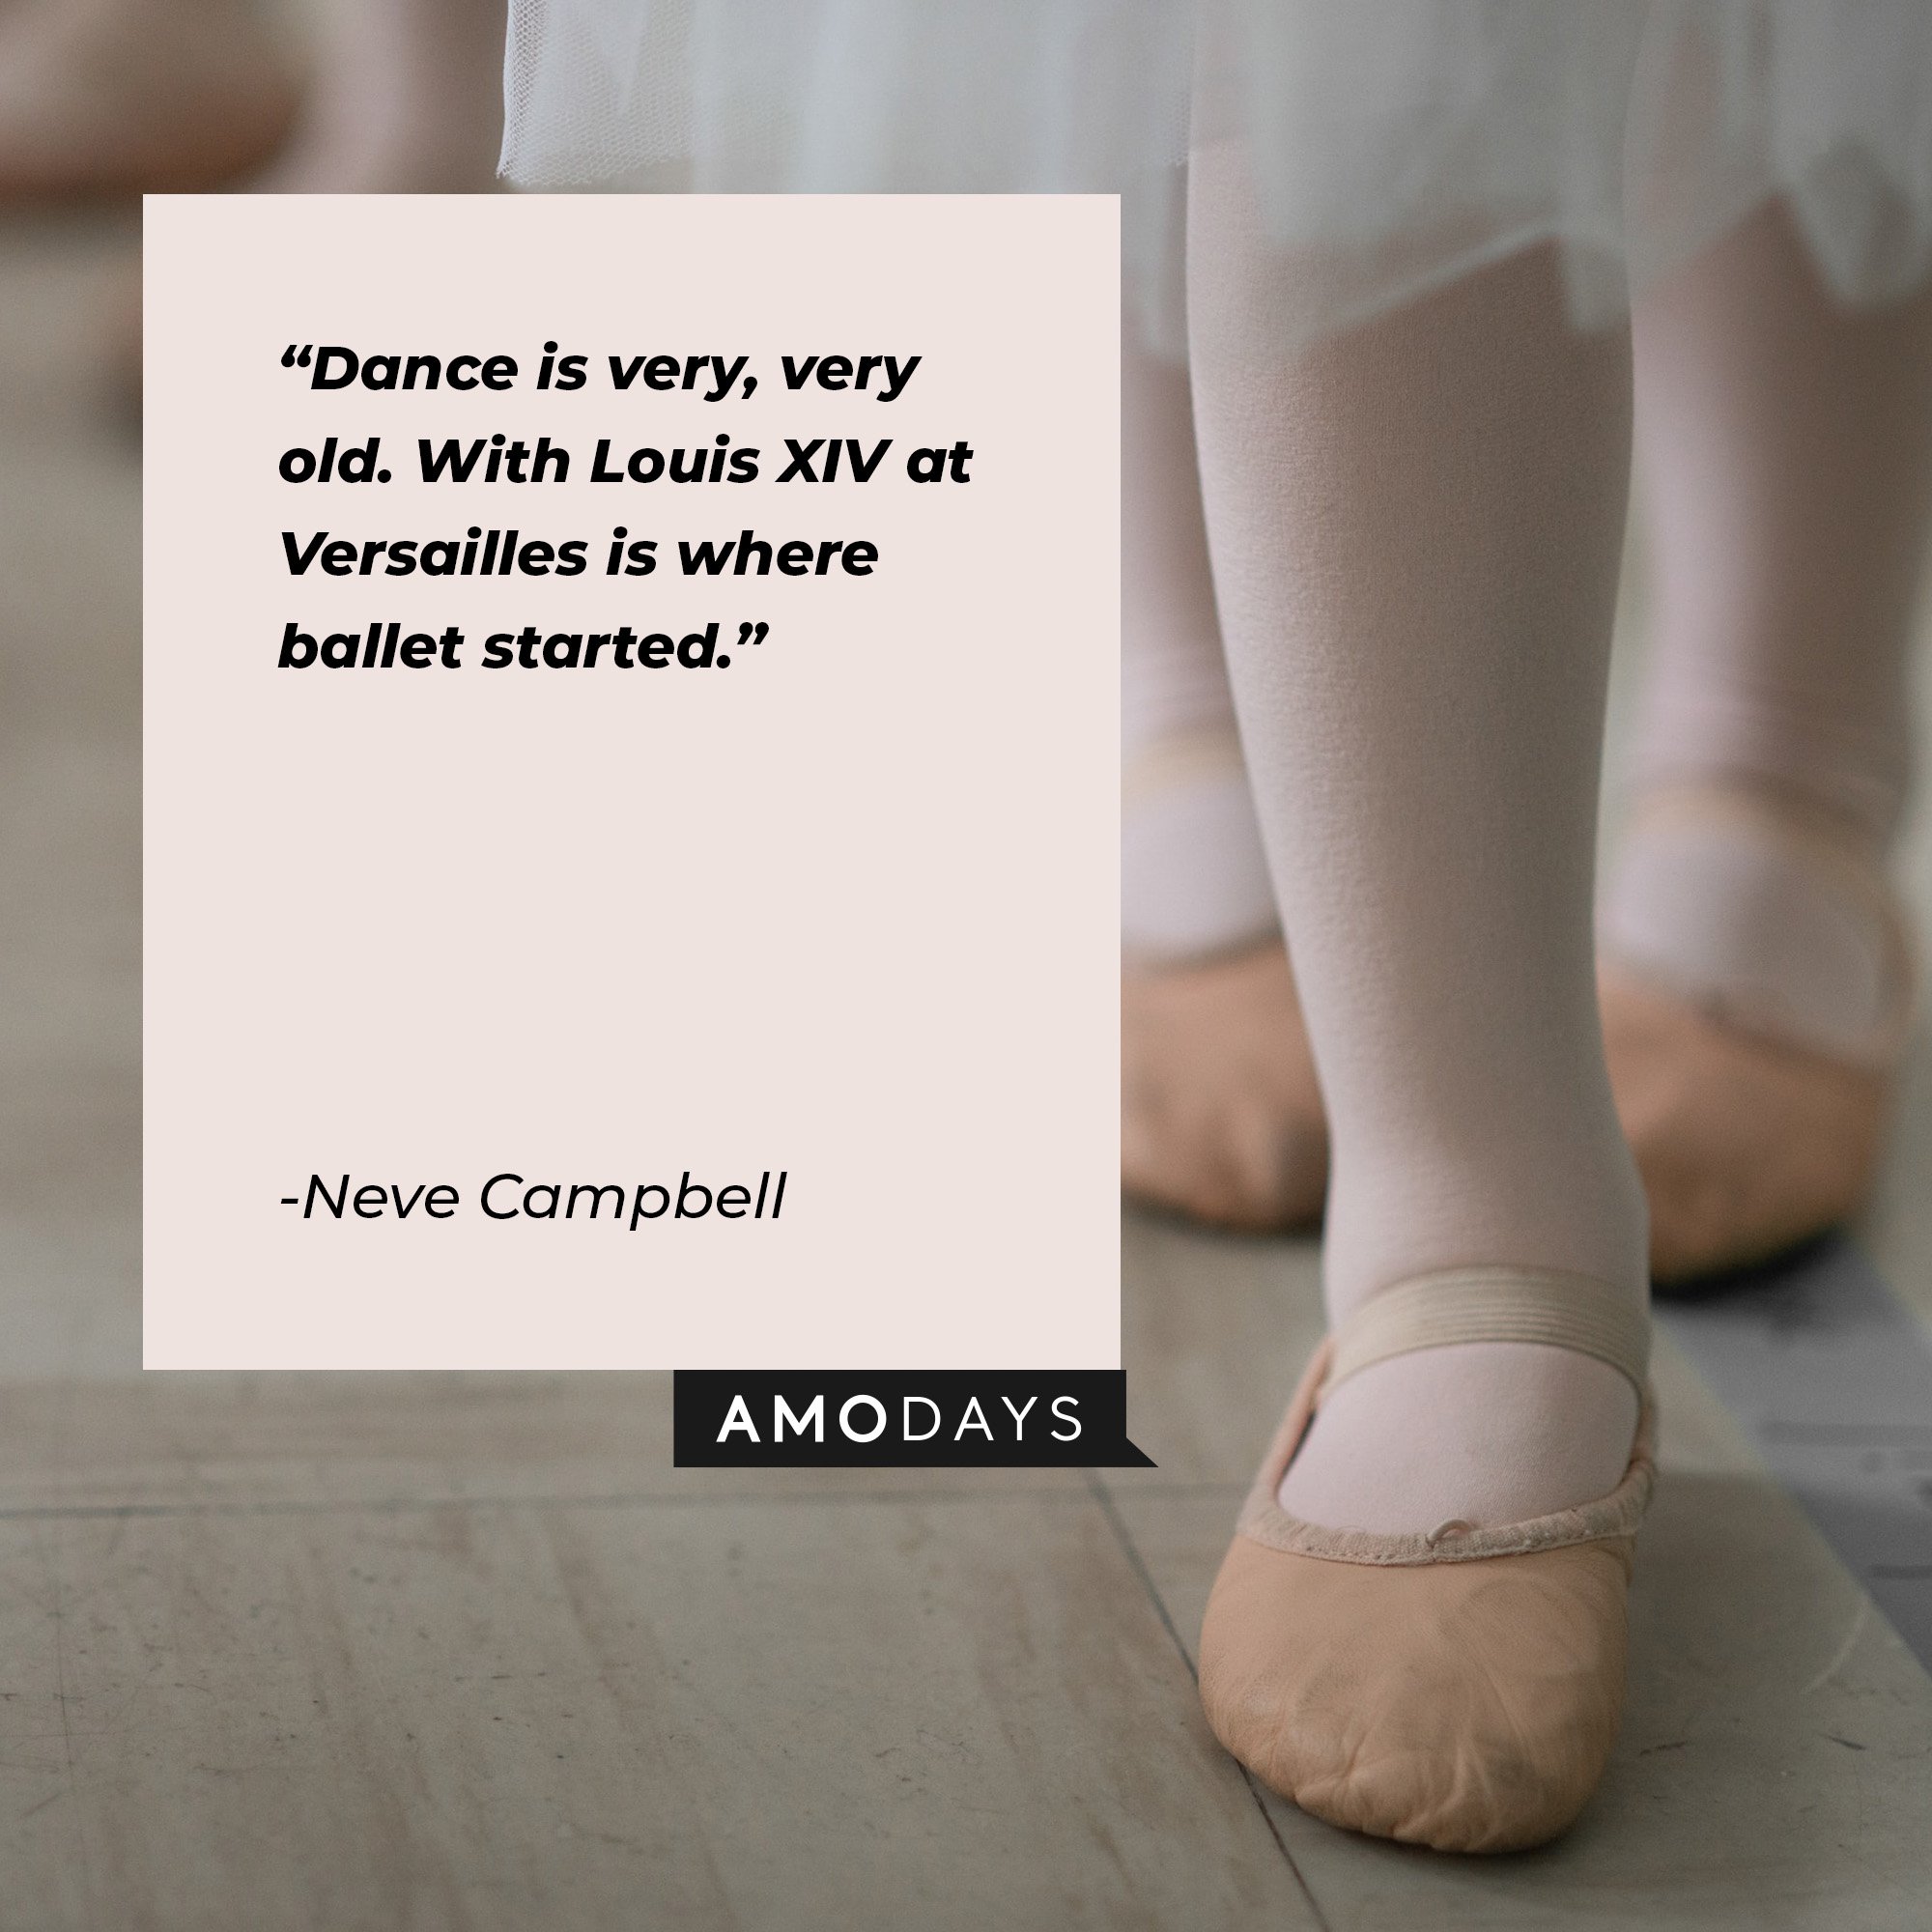  Neve Campbell’s quote: "Dance is very, very old. With Louis XIV at Versailles is where ballet started." | Image: AmoDays